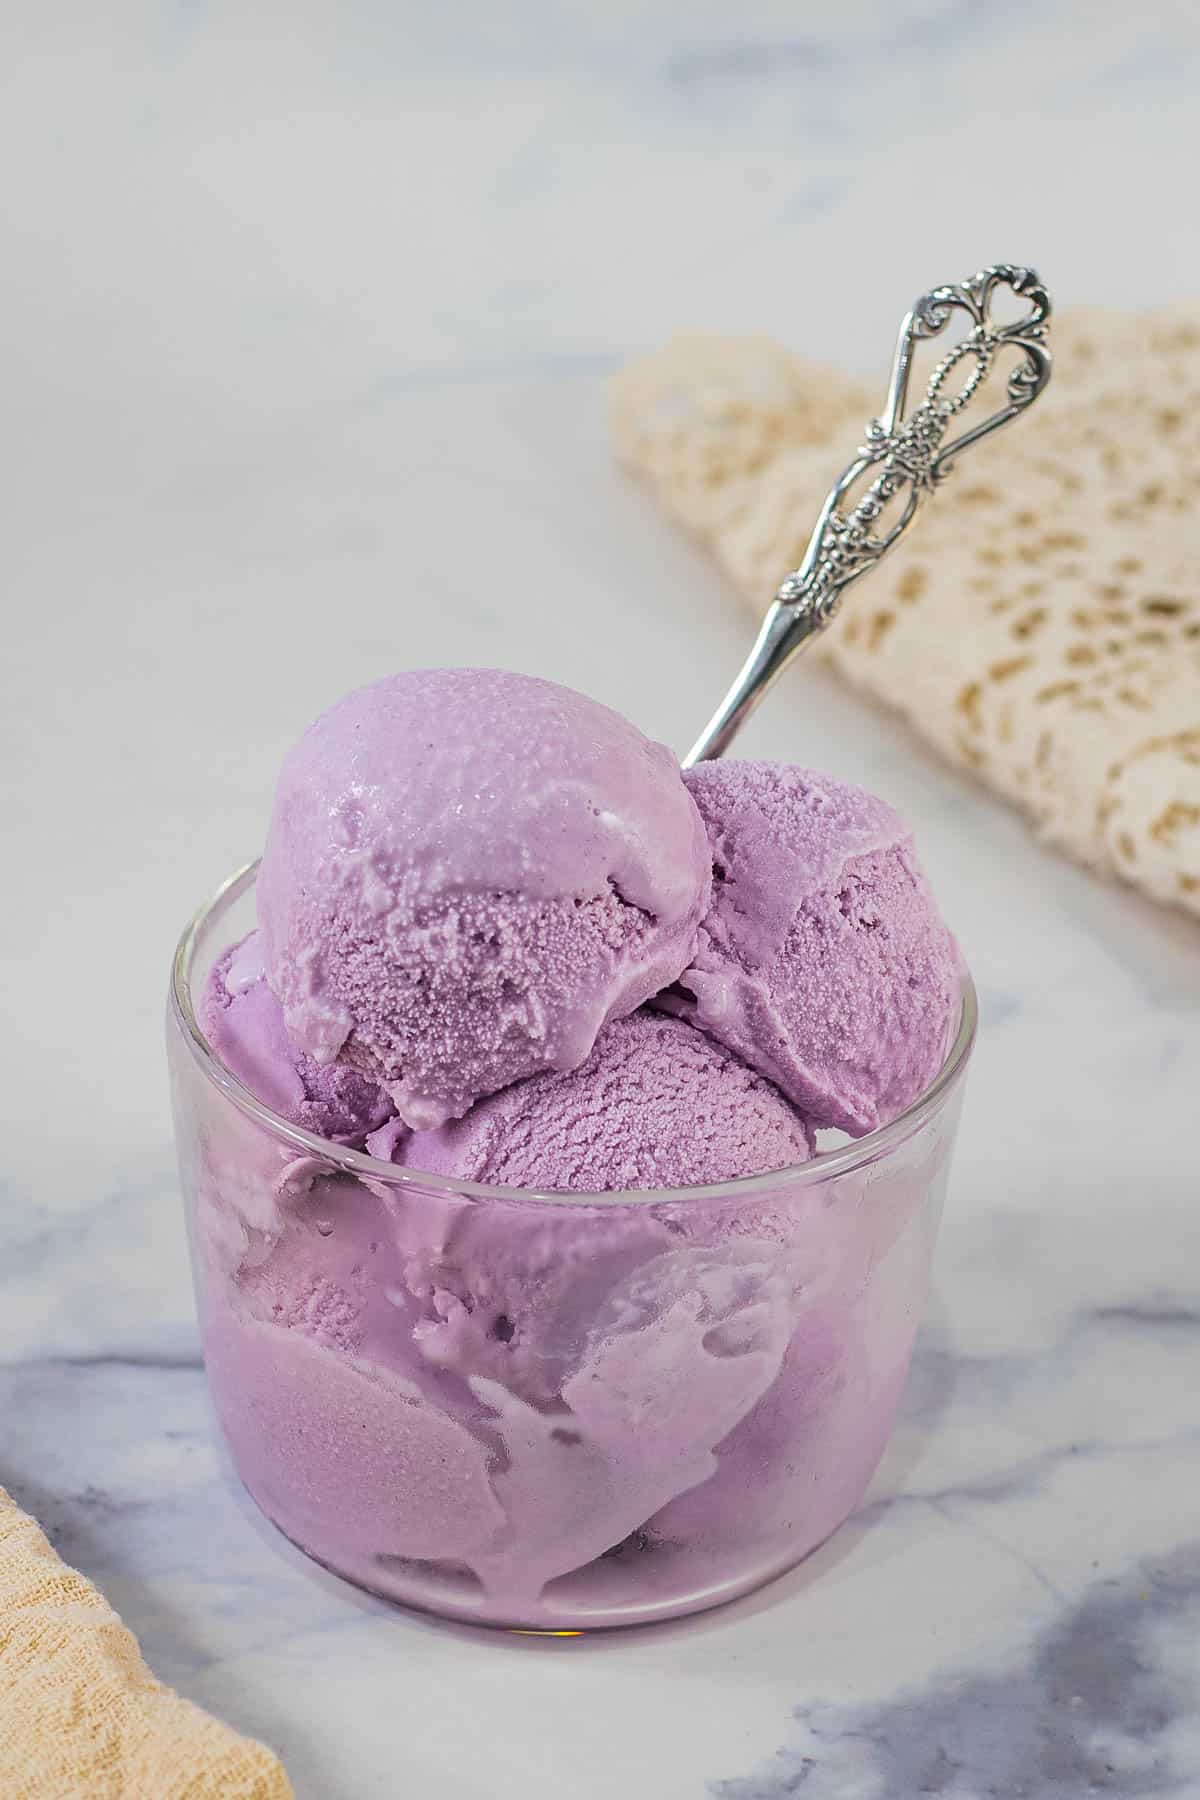 Scoops of purple ice cream in a transparent glass with a silver spoon